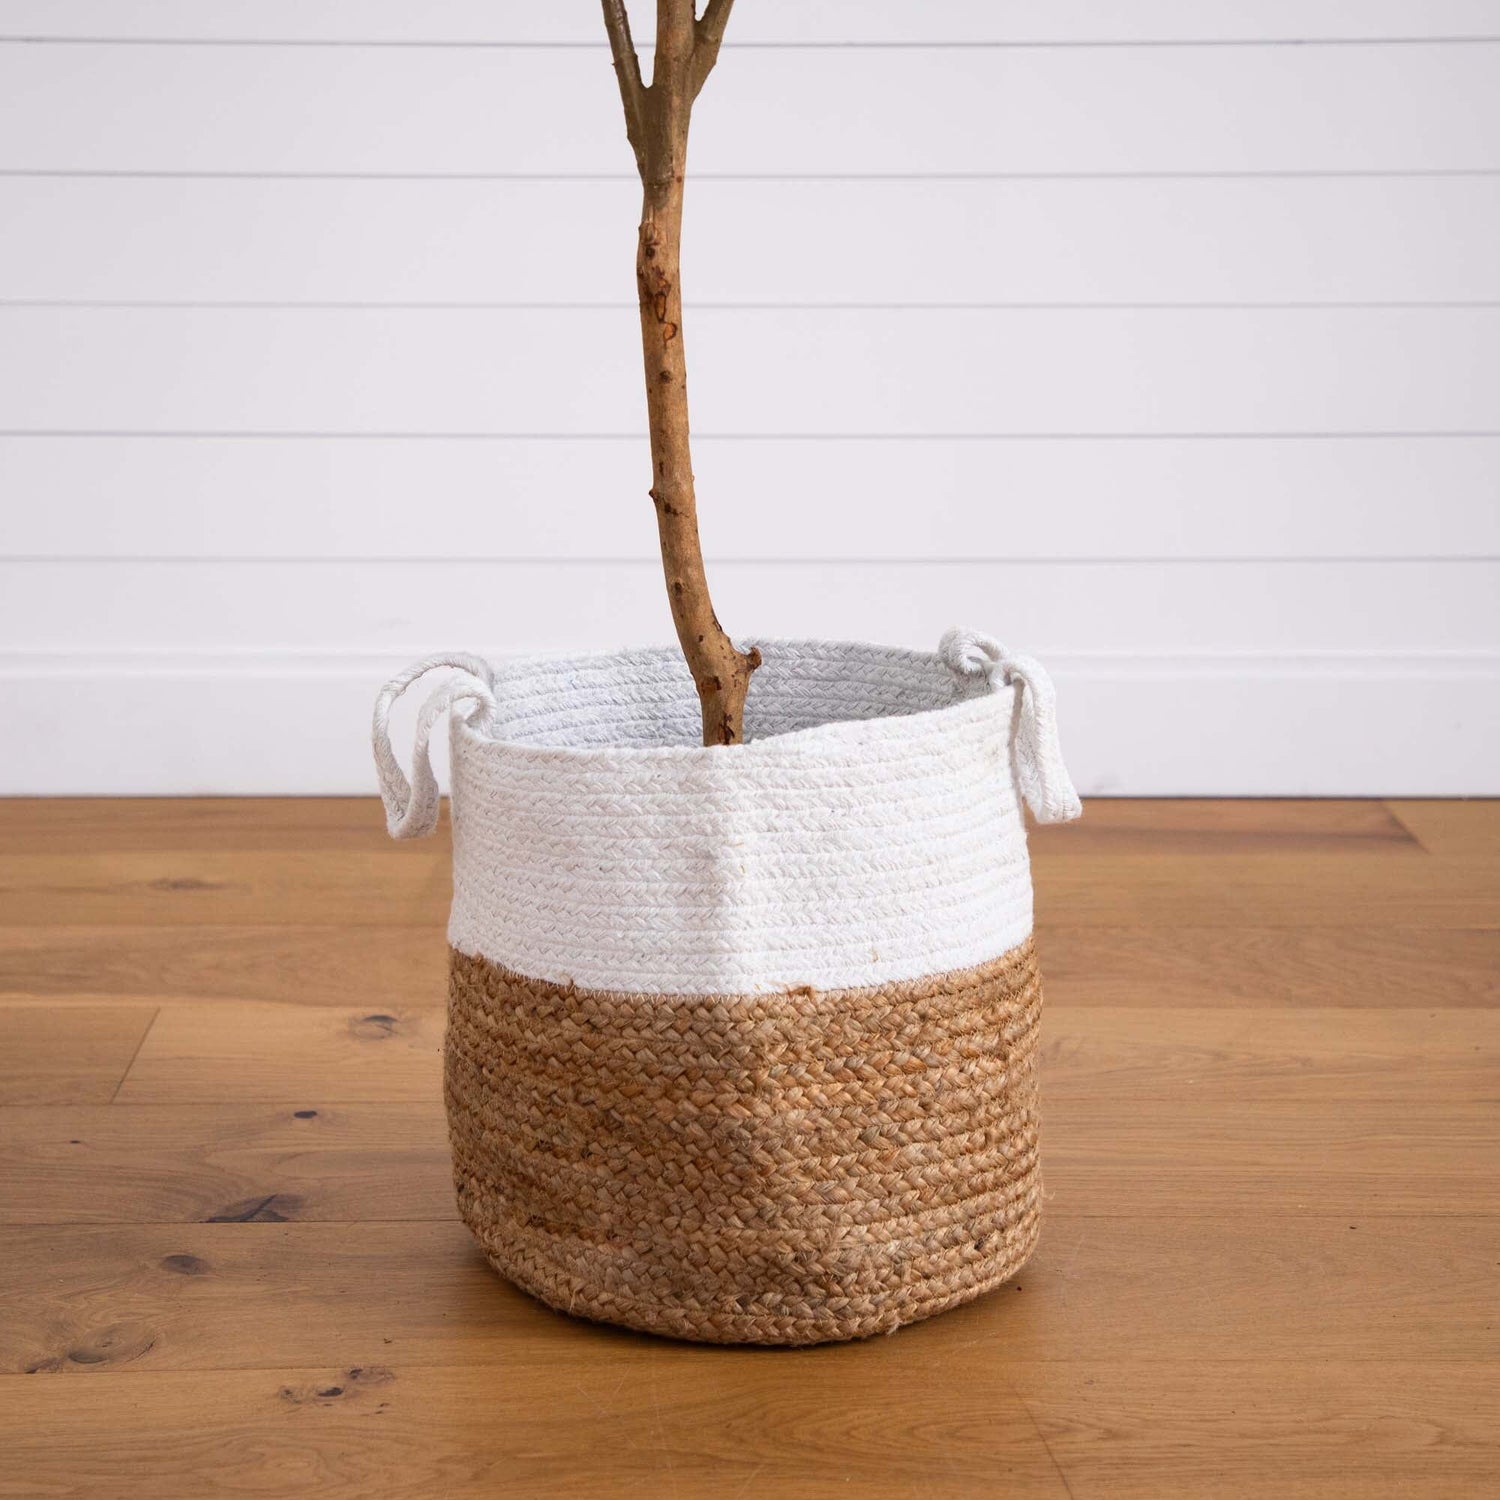 7’ Artificial Olive Tree with Natural Trunk and Handmade Jute Basket